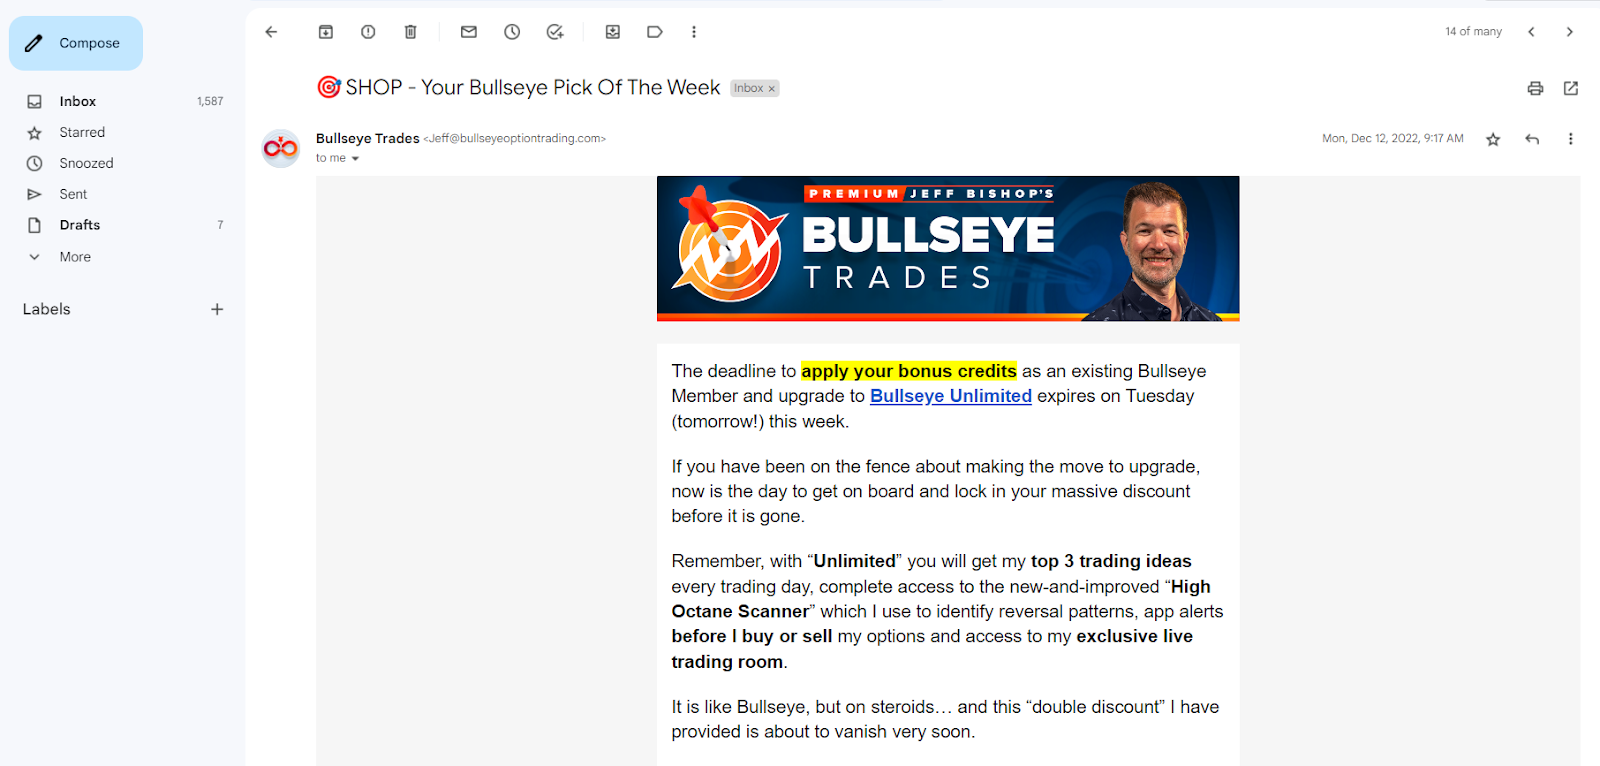 Email from bullseye trades